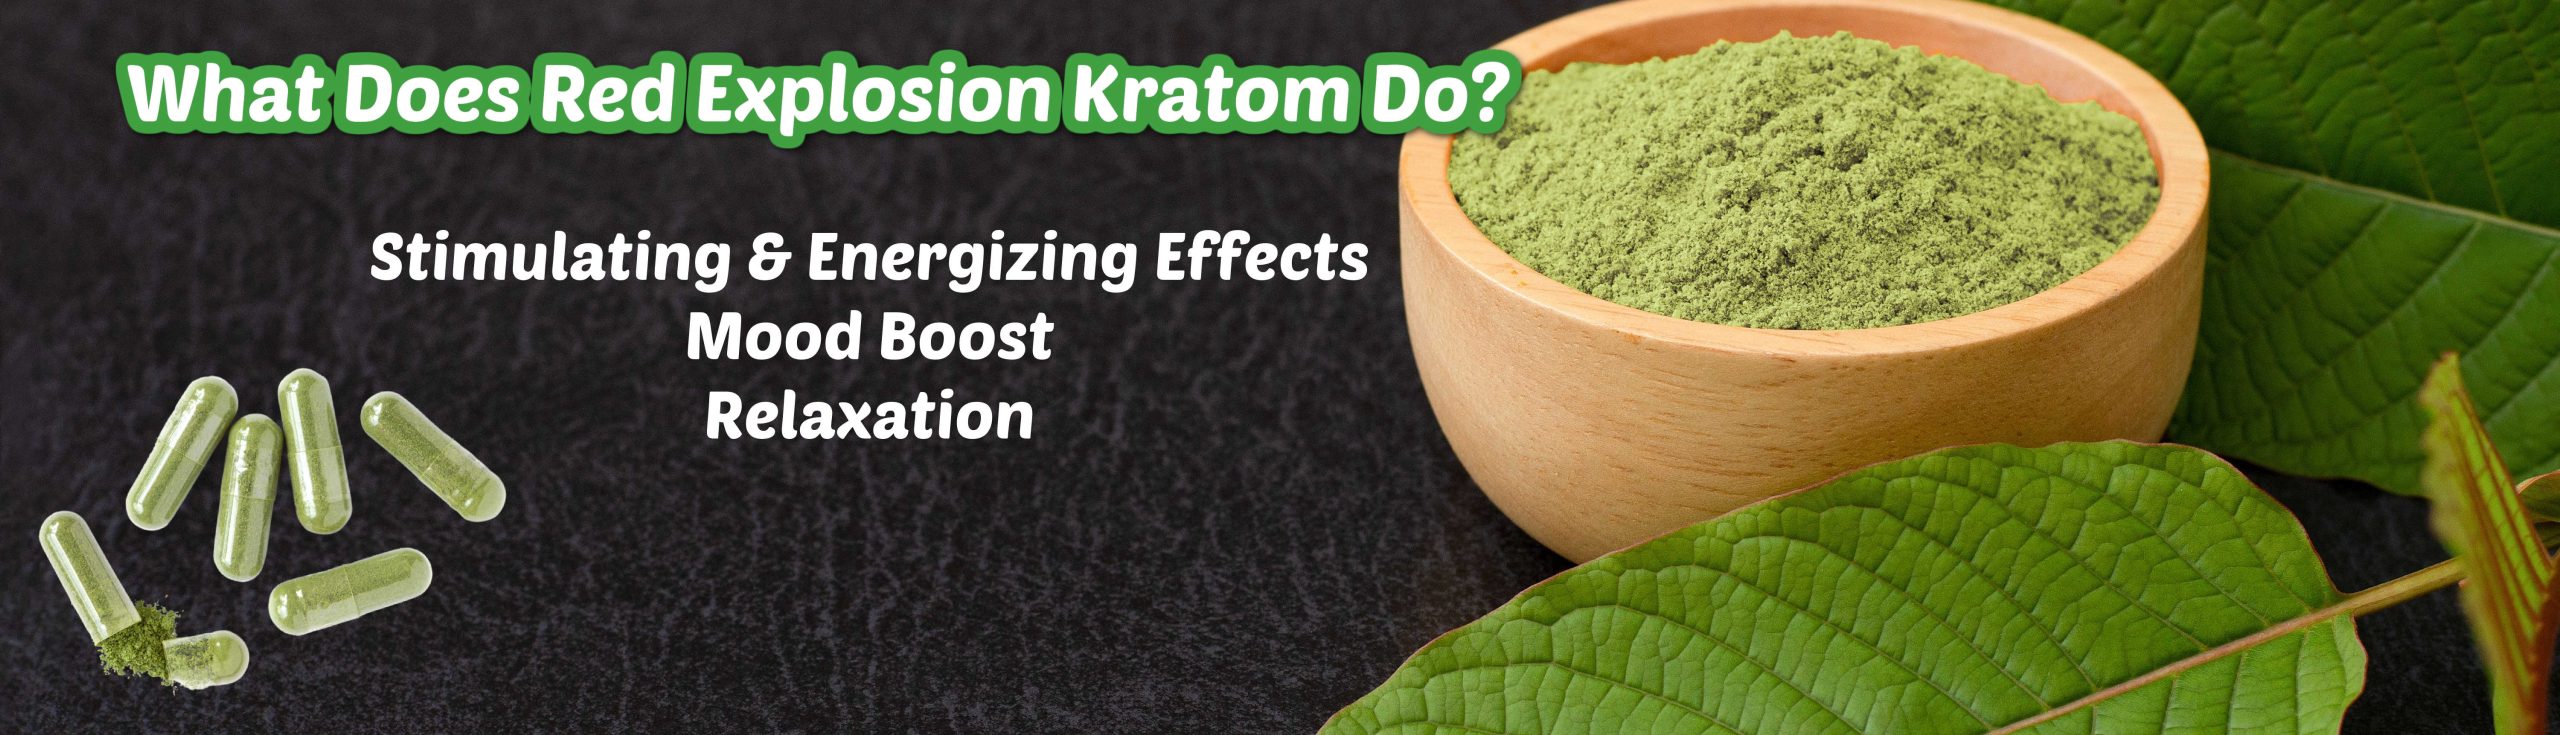 Red Explosion Kratom – Learning About Its Effects and Finding the Right Dosage